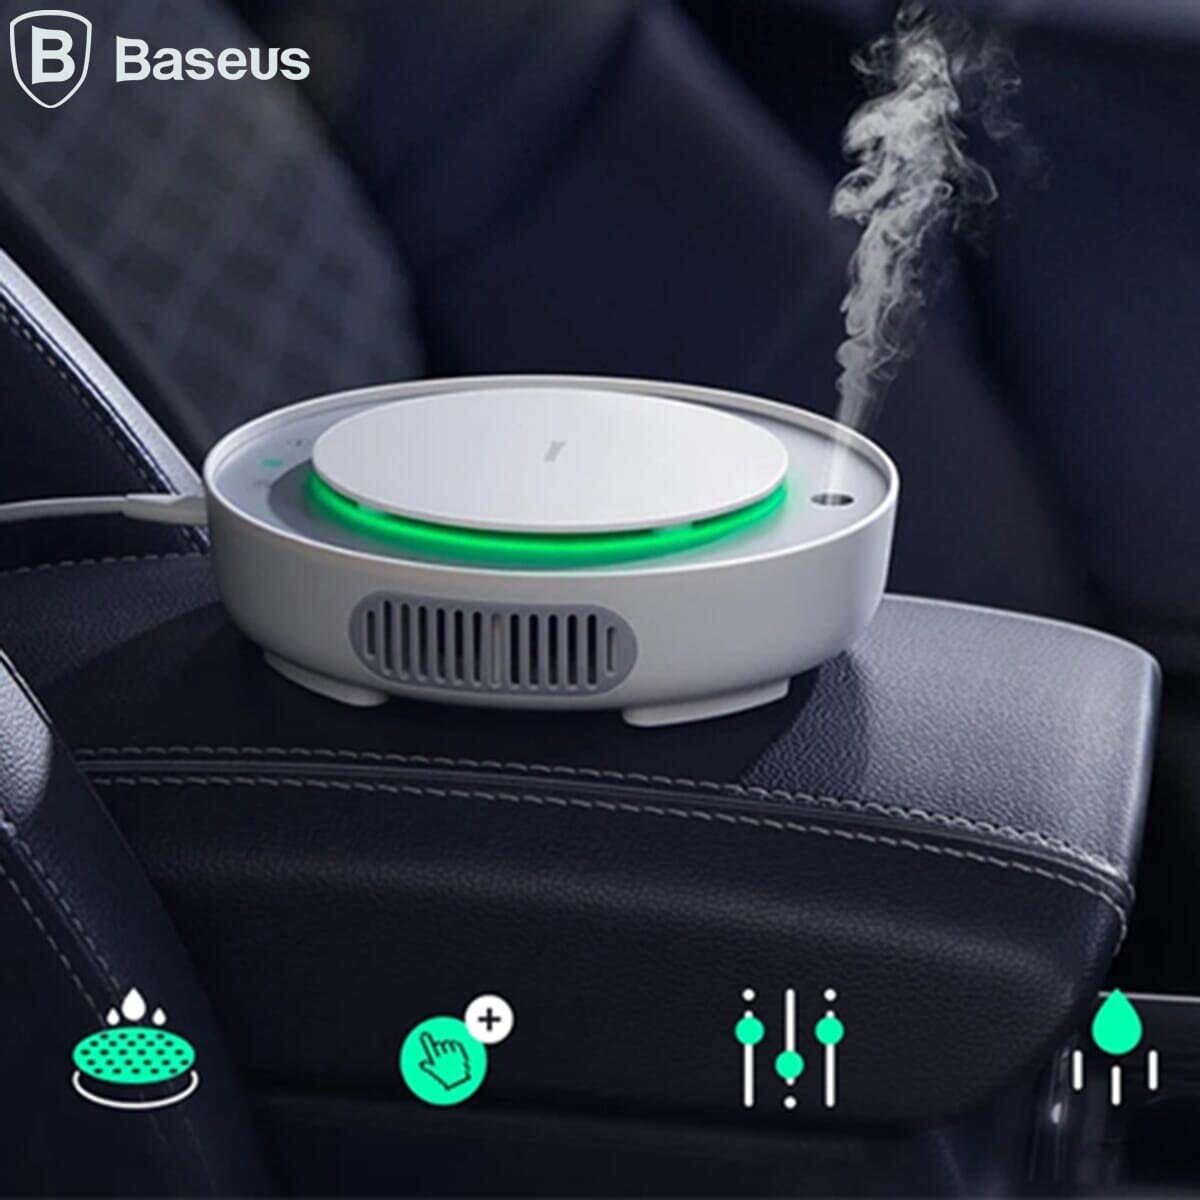 Baseus 2In1 Car Humidifier Car Air Purifier Fresh Clean Air In Car Two Functions Of Humidification And Purification